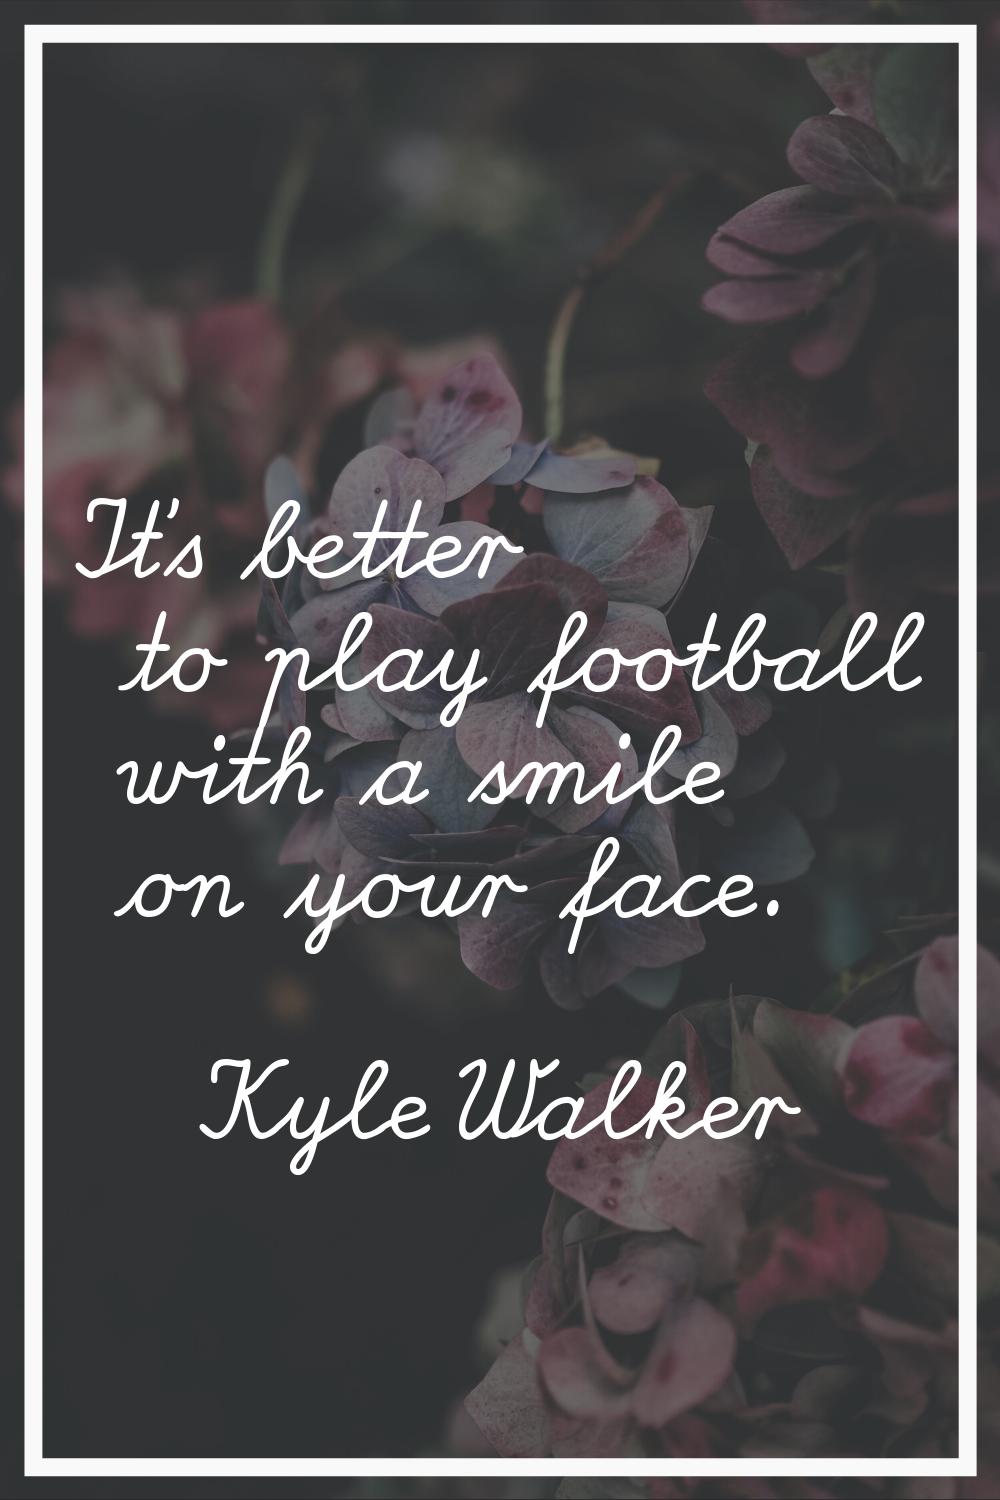 It's better to play football with a smile on your face.